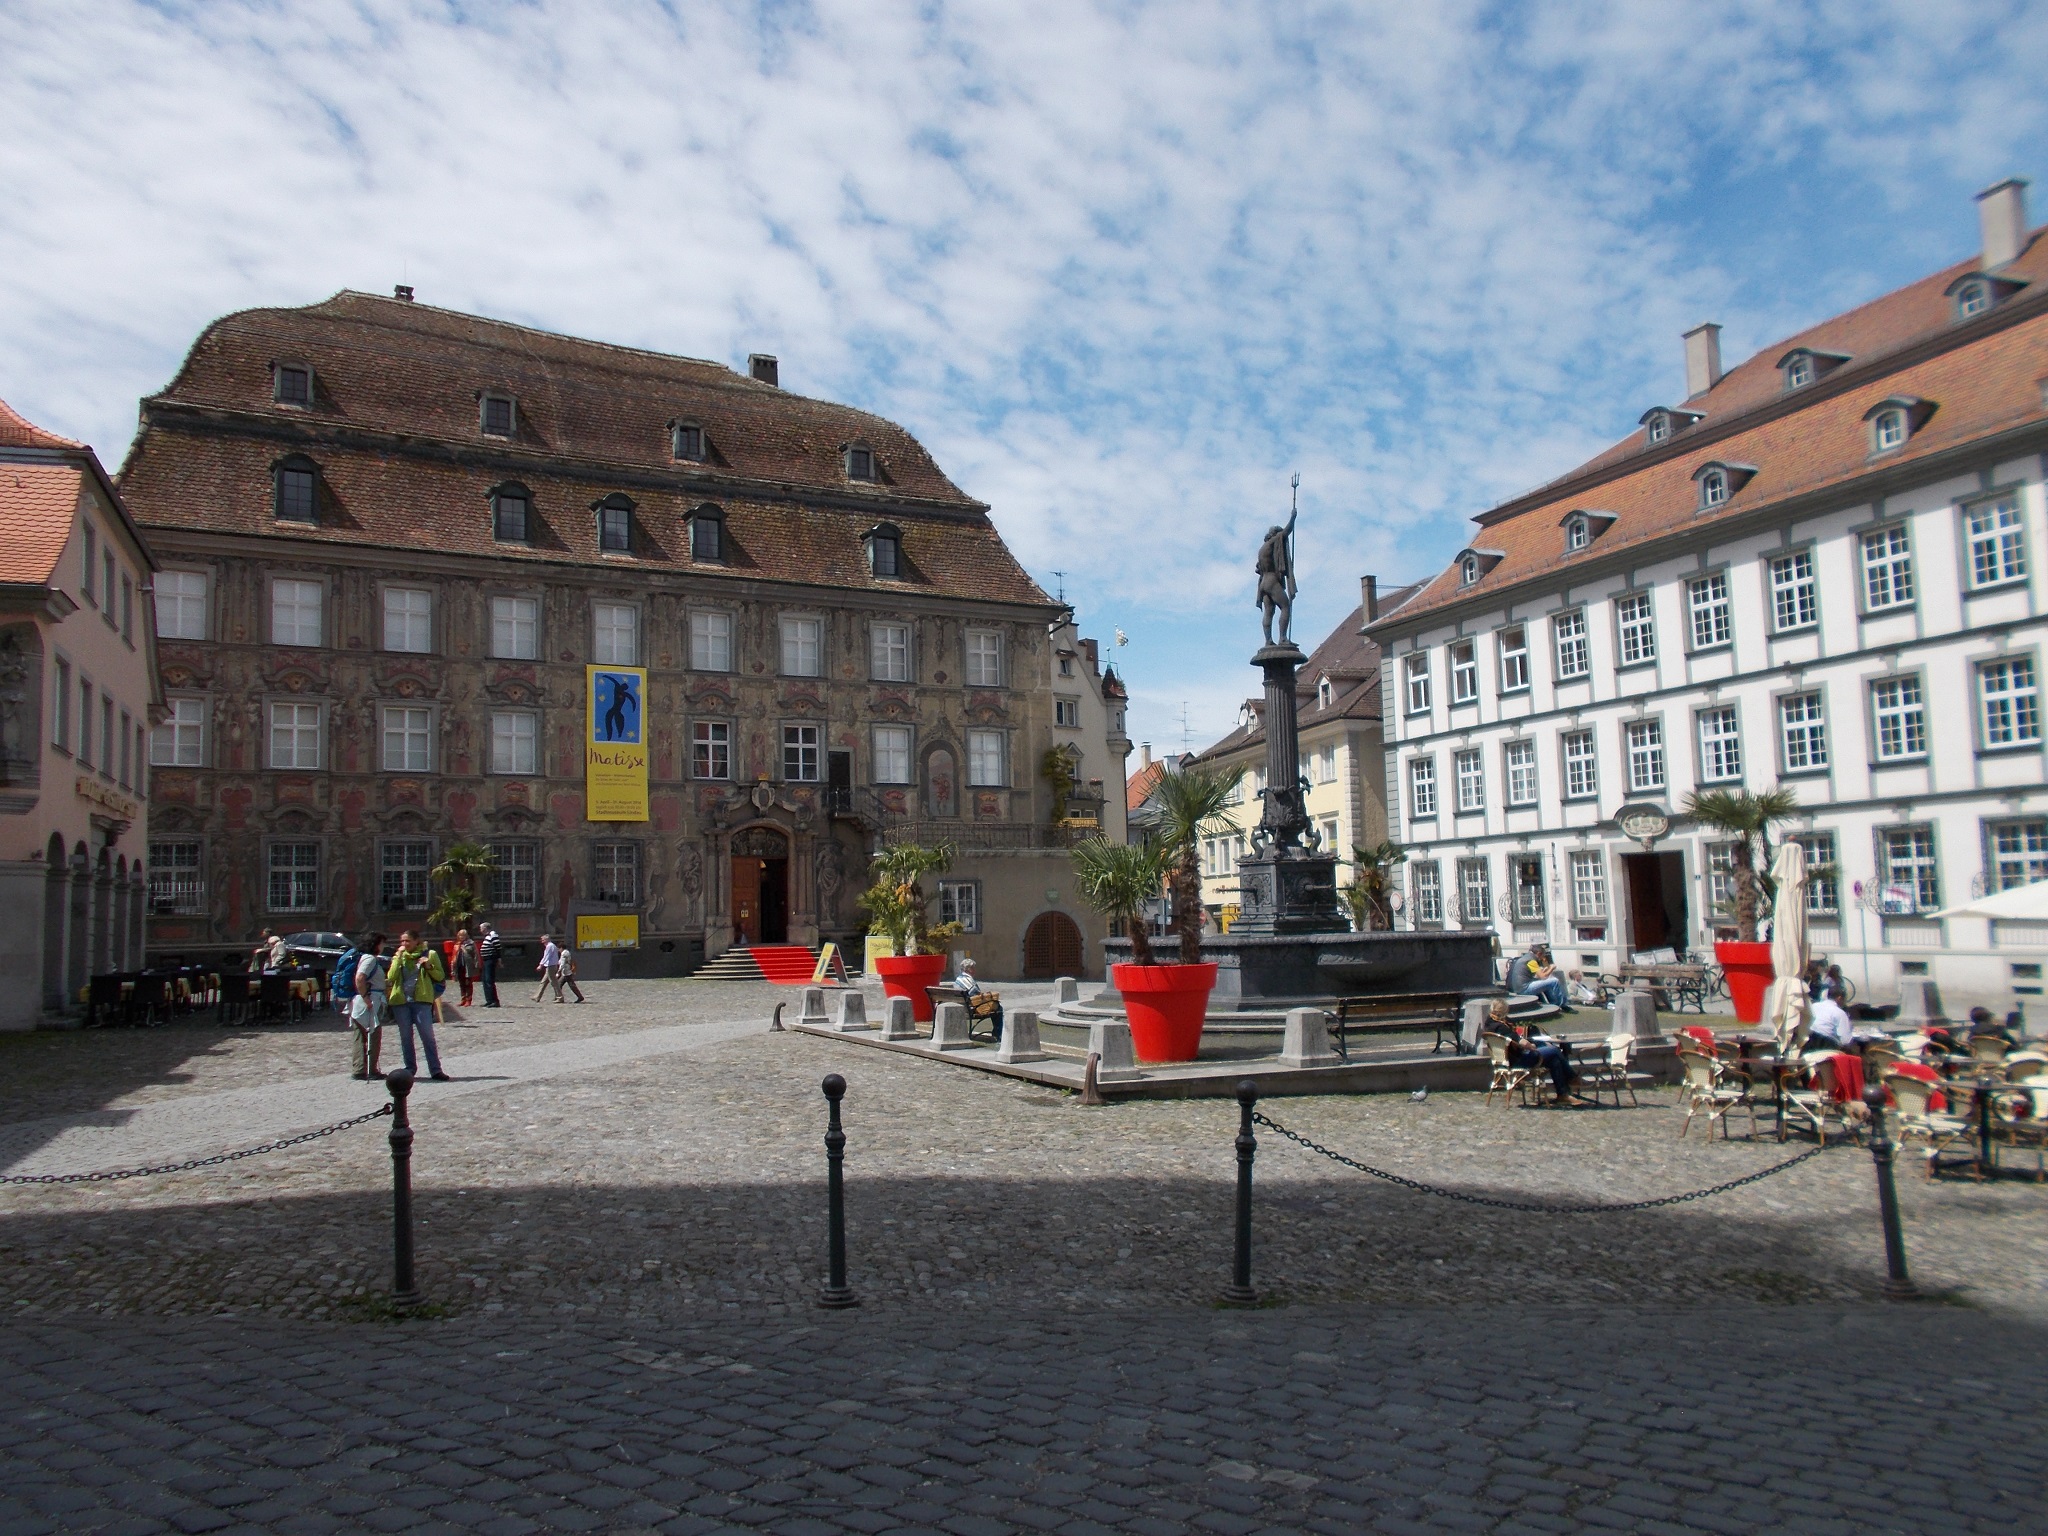 A town square with a fountain at its centre.